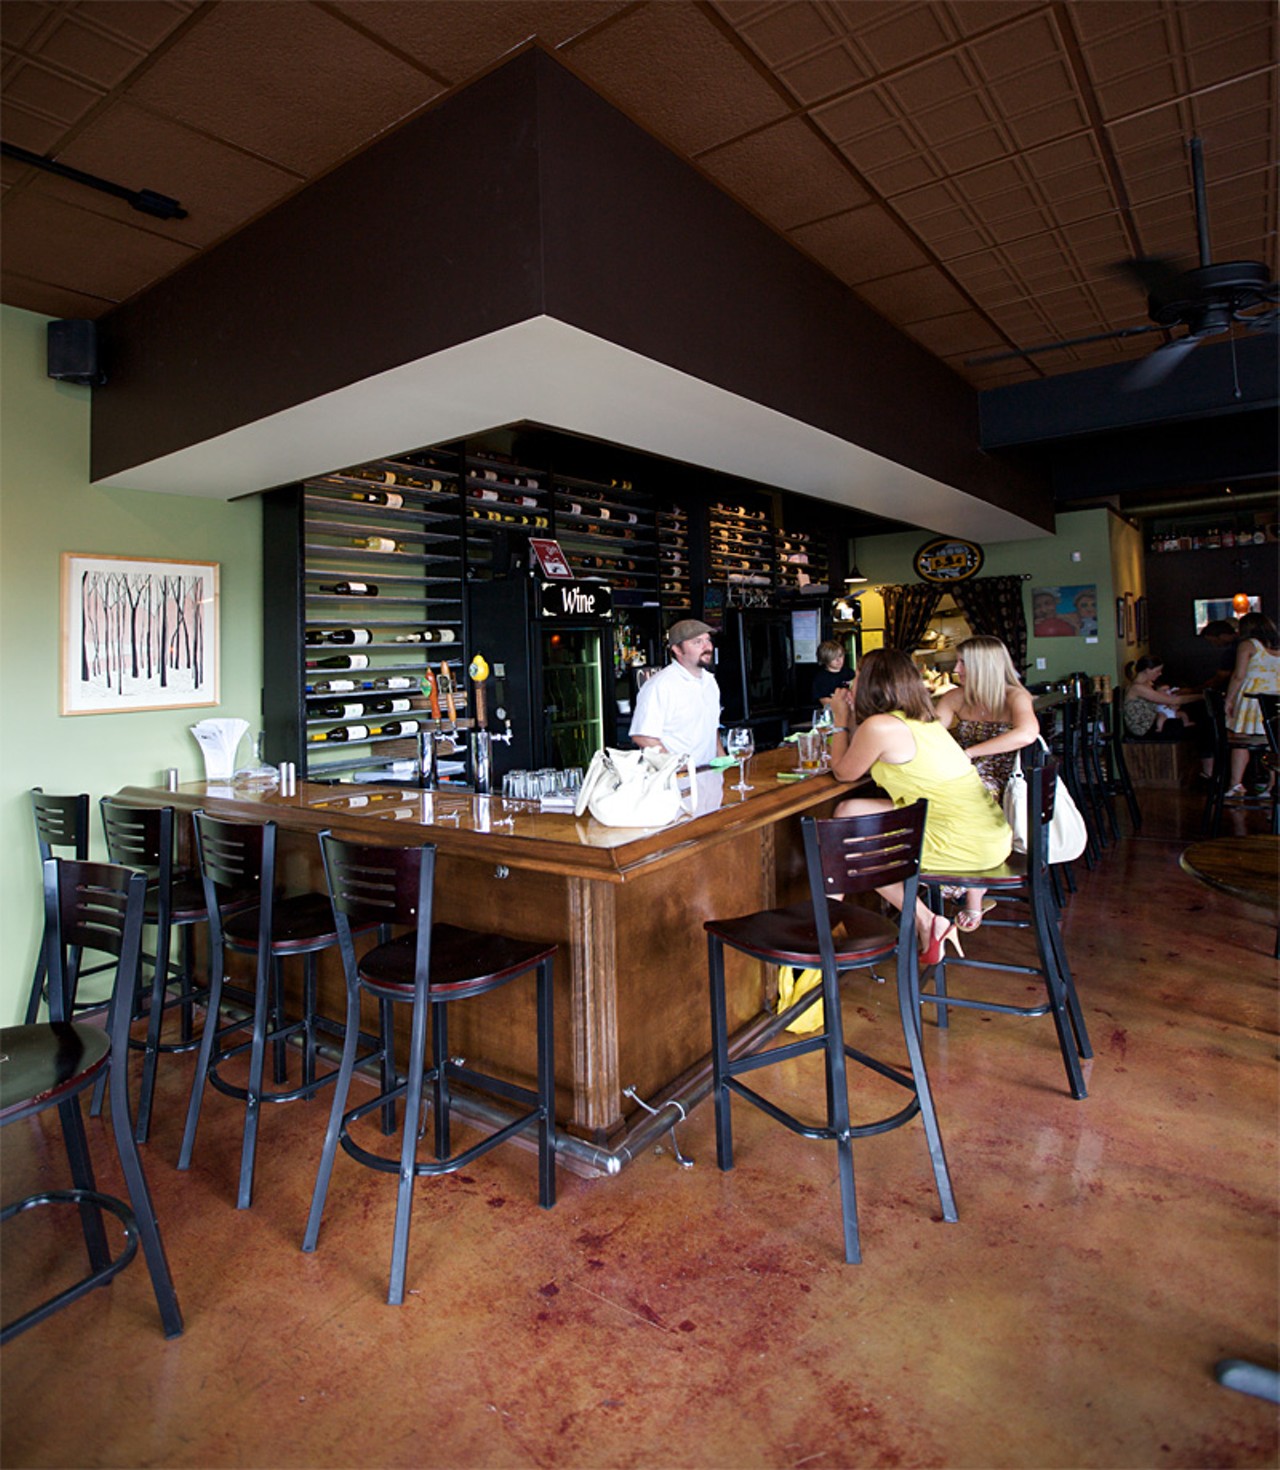 Inside Cork Wine Bar, owner Mike Lonero chats with customers from behind the bar.